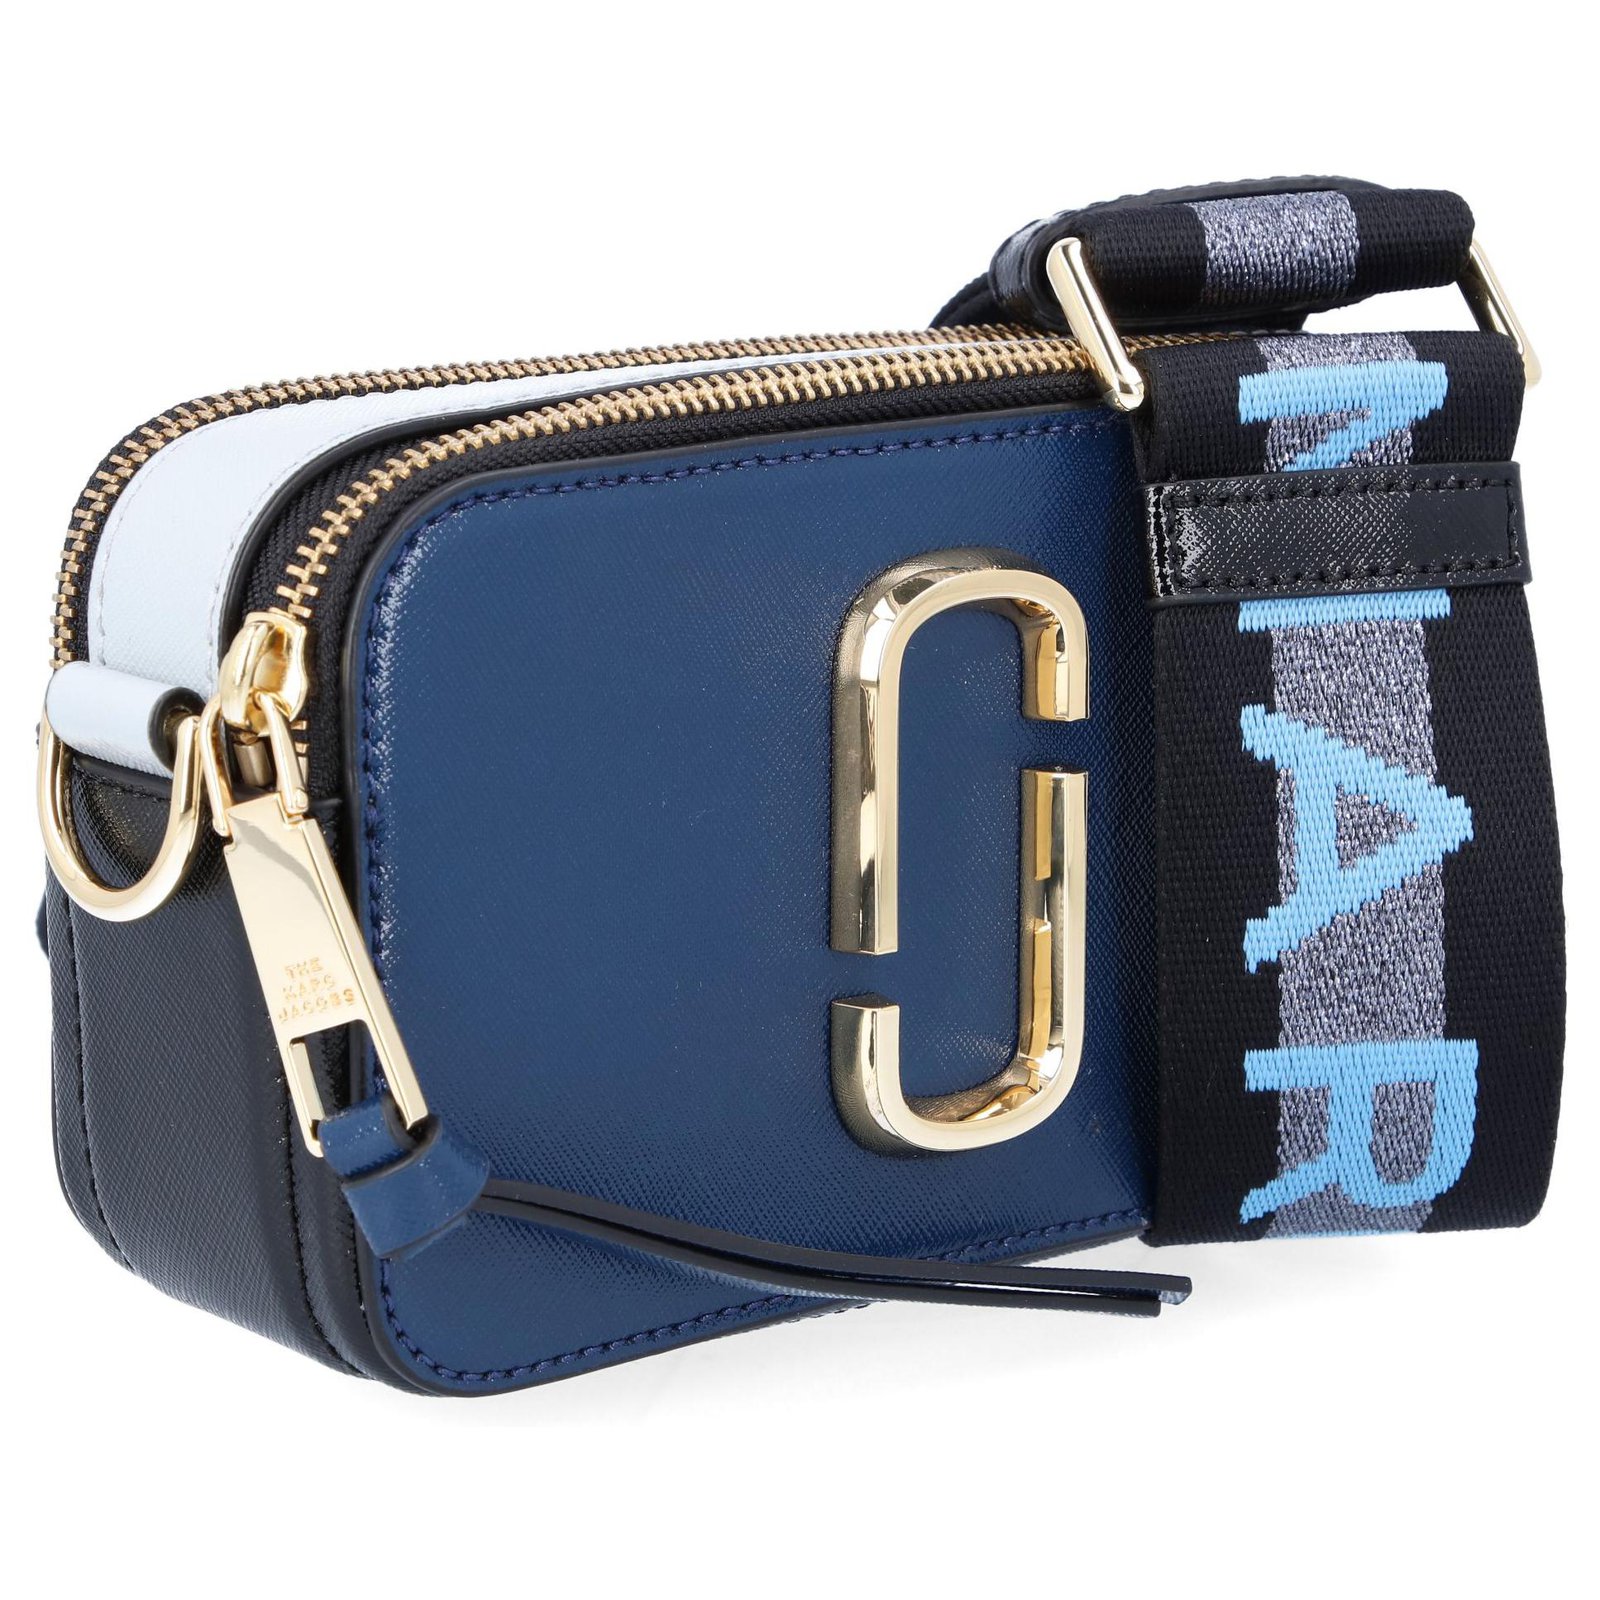 Snapshot leather crossbody bag Marc Jacobs Blue in Leather - 36620140